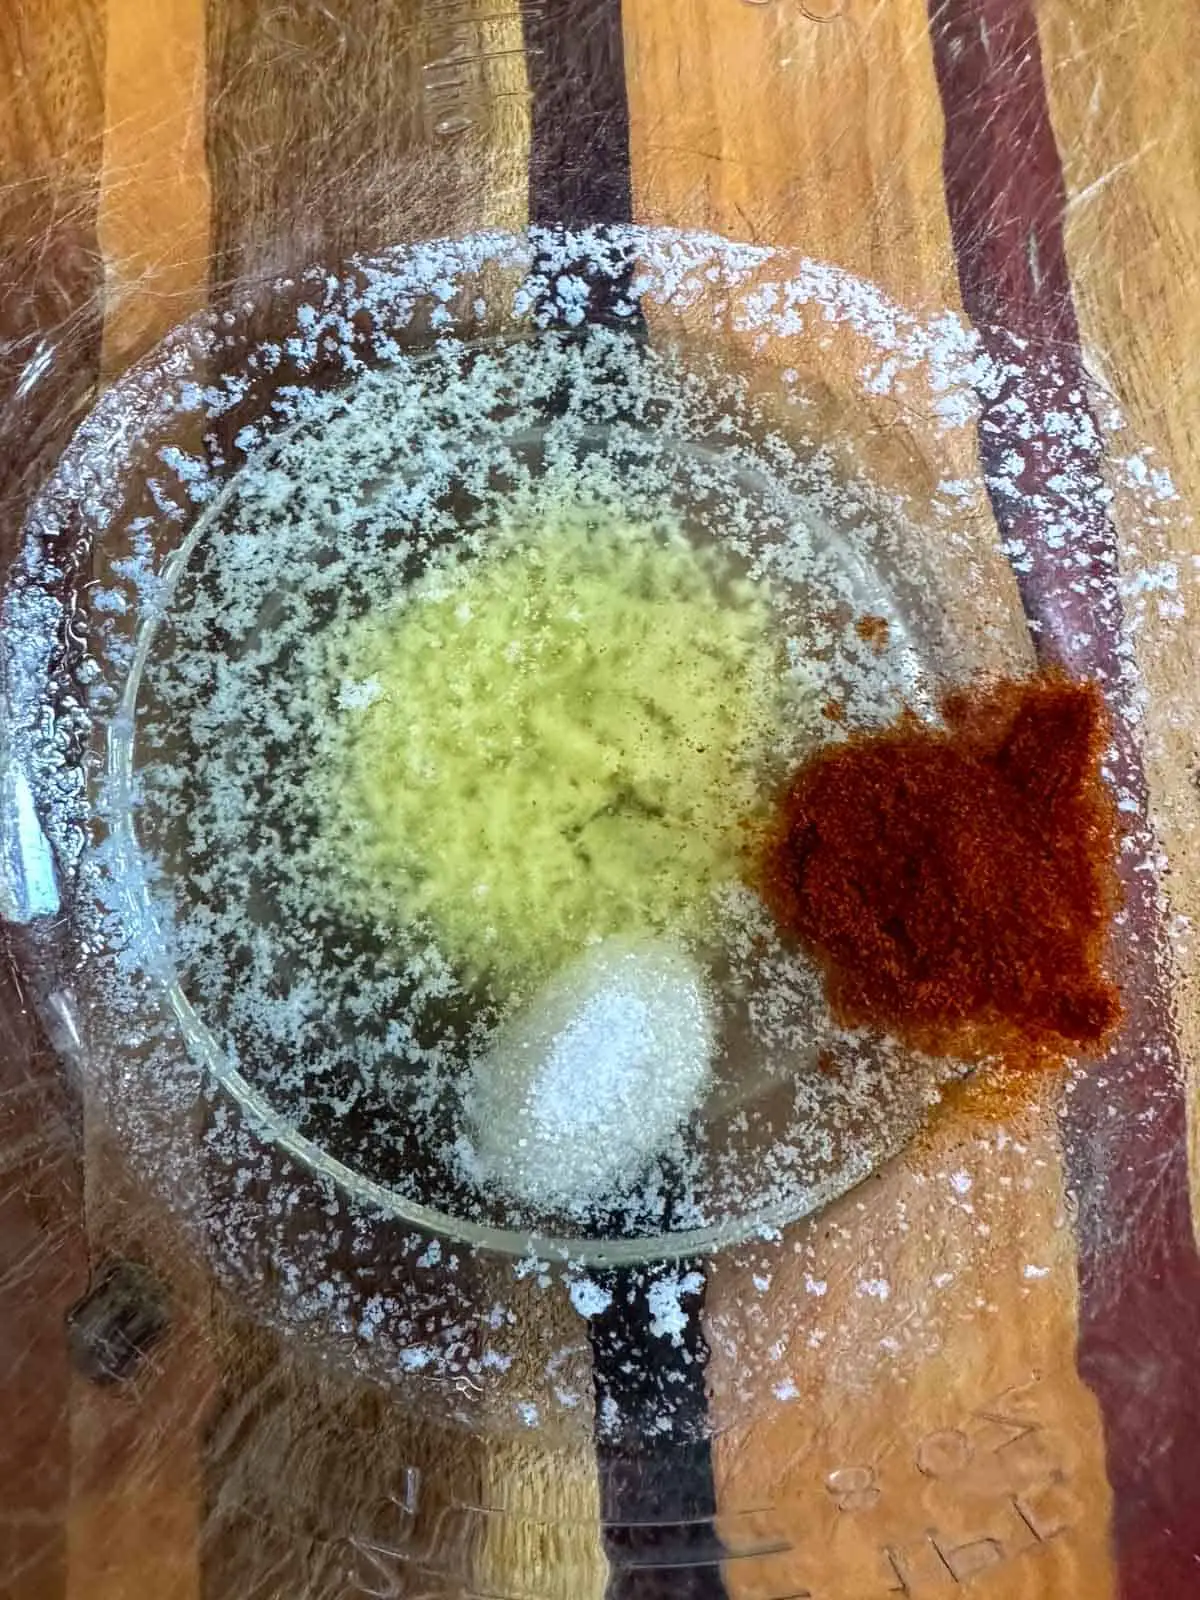 A glass bowl containing melted butter, salt, and Carolina Reaper powder.